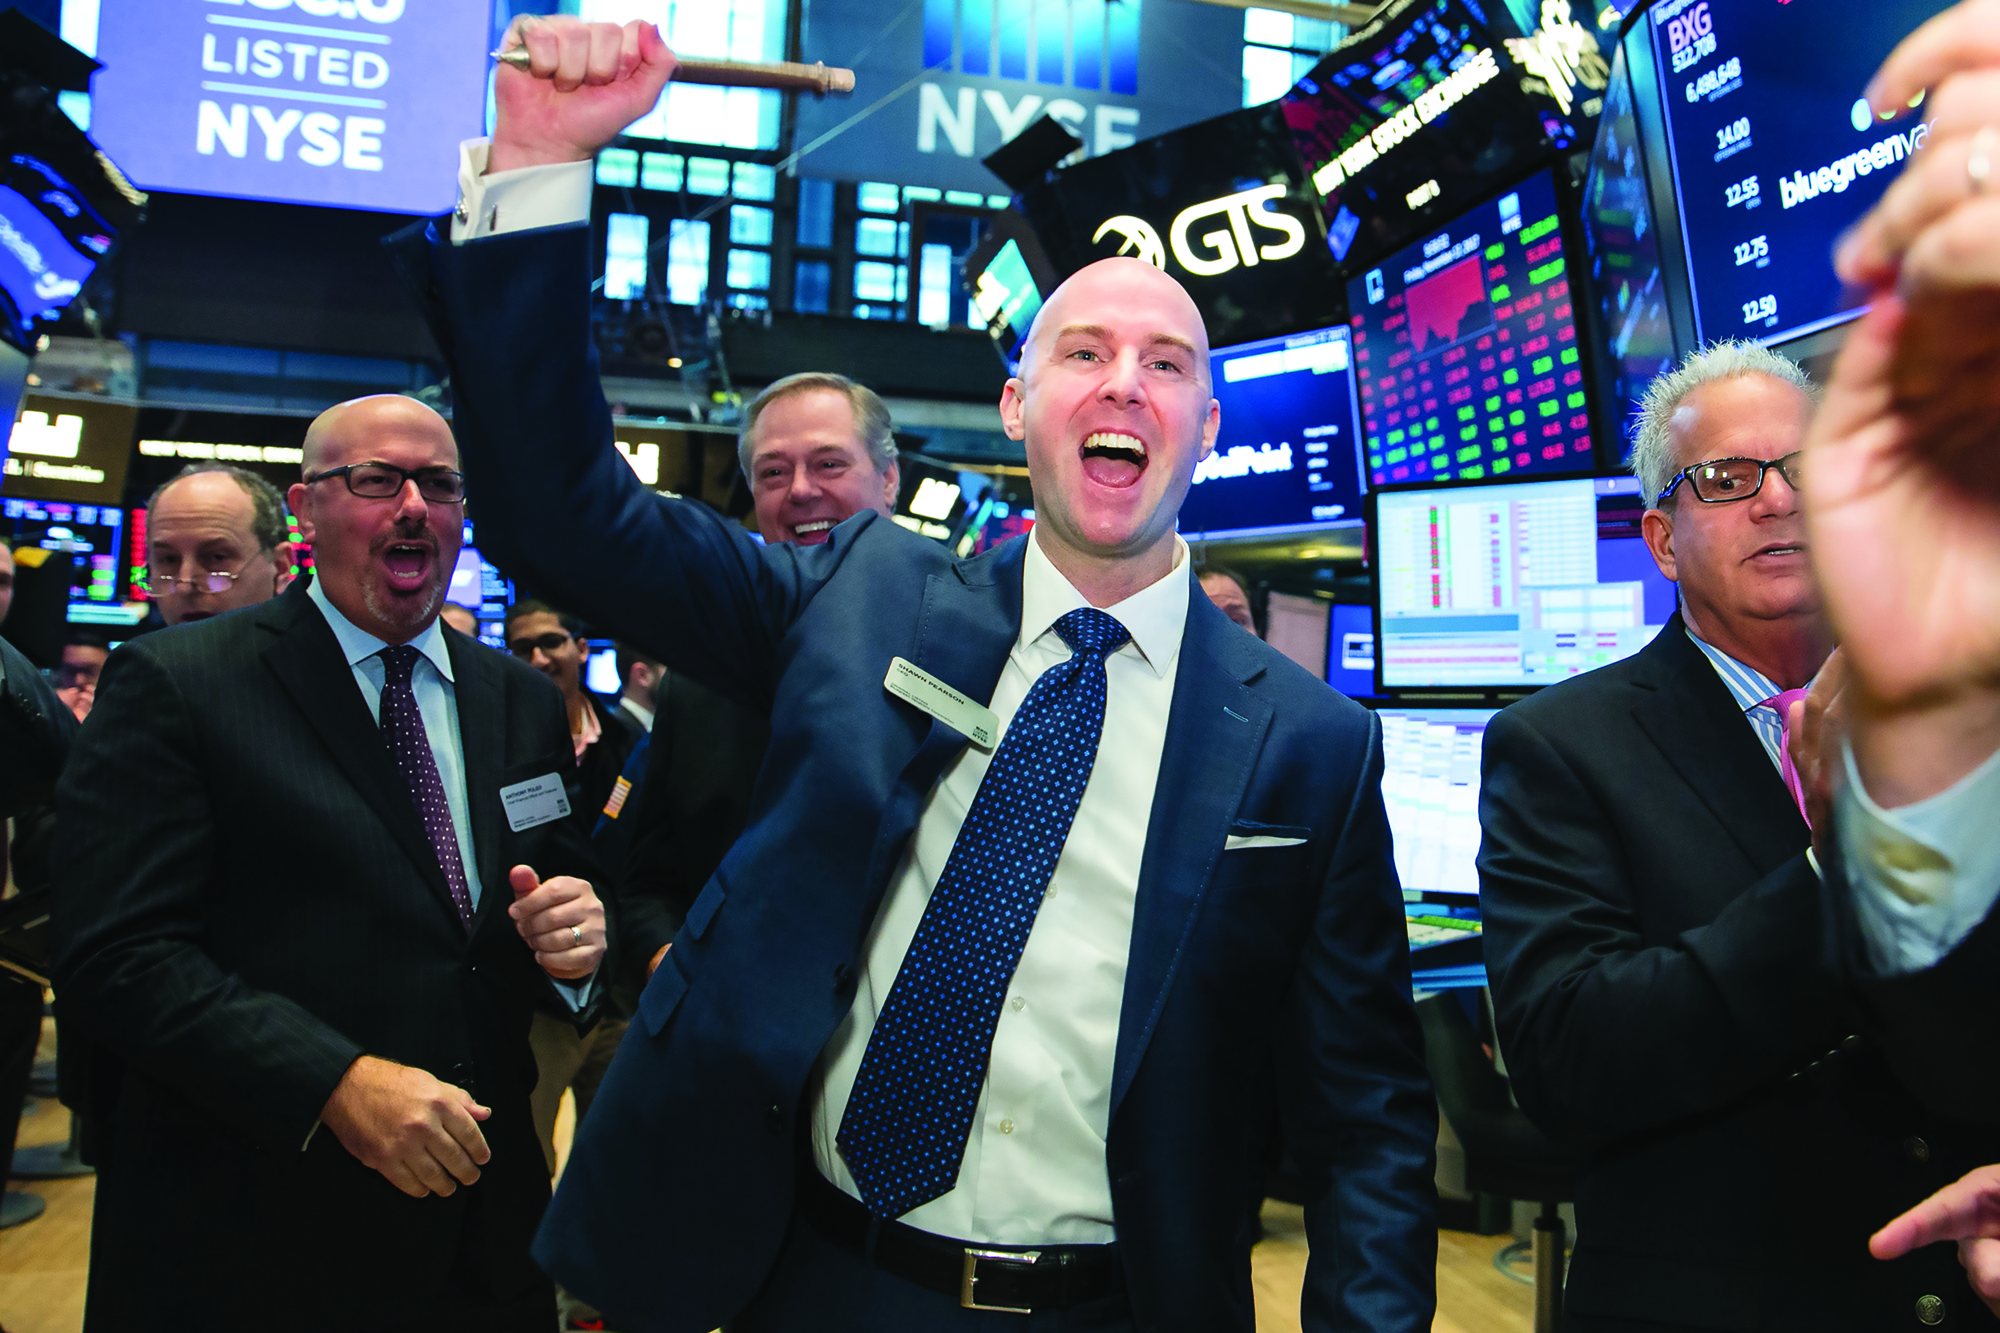 CEO Shawn Pearson celebrates Bluegreen’s IPO at the New York Stock Exchange